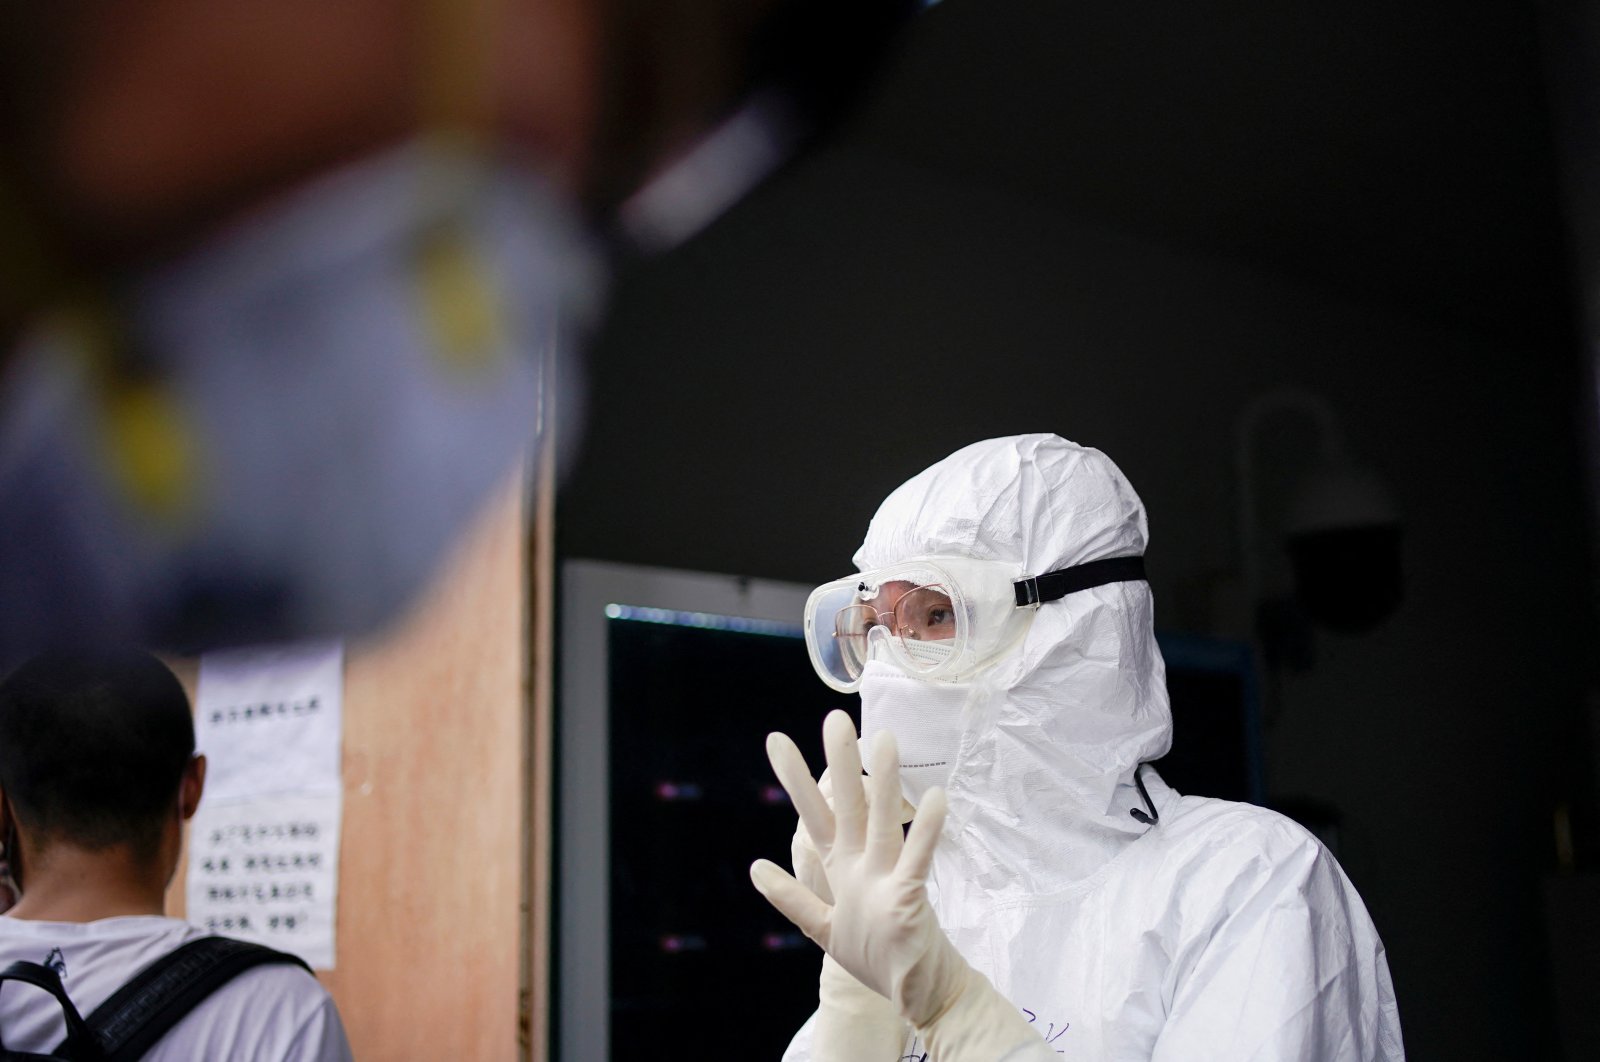 A health care professional gestures as residents line up for nucleic acid tests in Wuhan, the Chinese city hit hardest by the COVID-19 outbreak, Hubei province, China, May 16, 2020. (Reuters Photo)